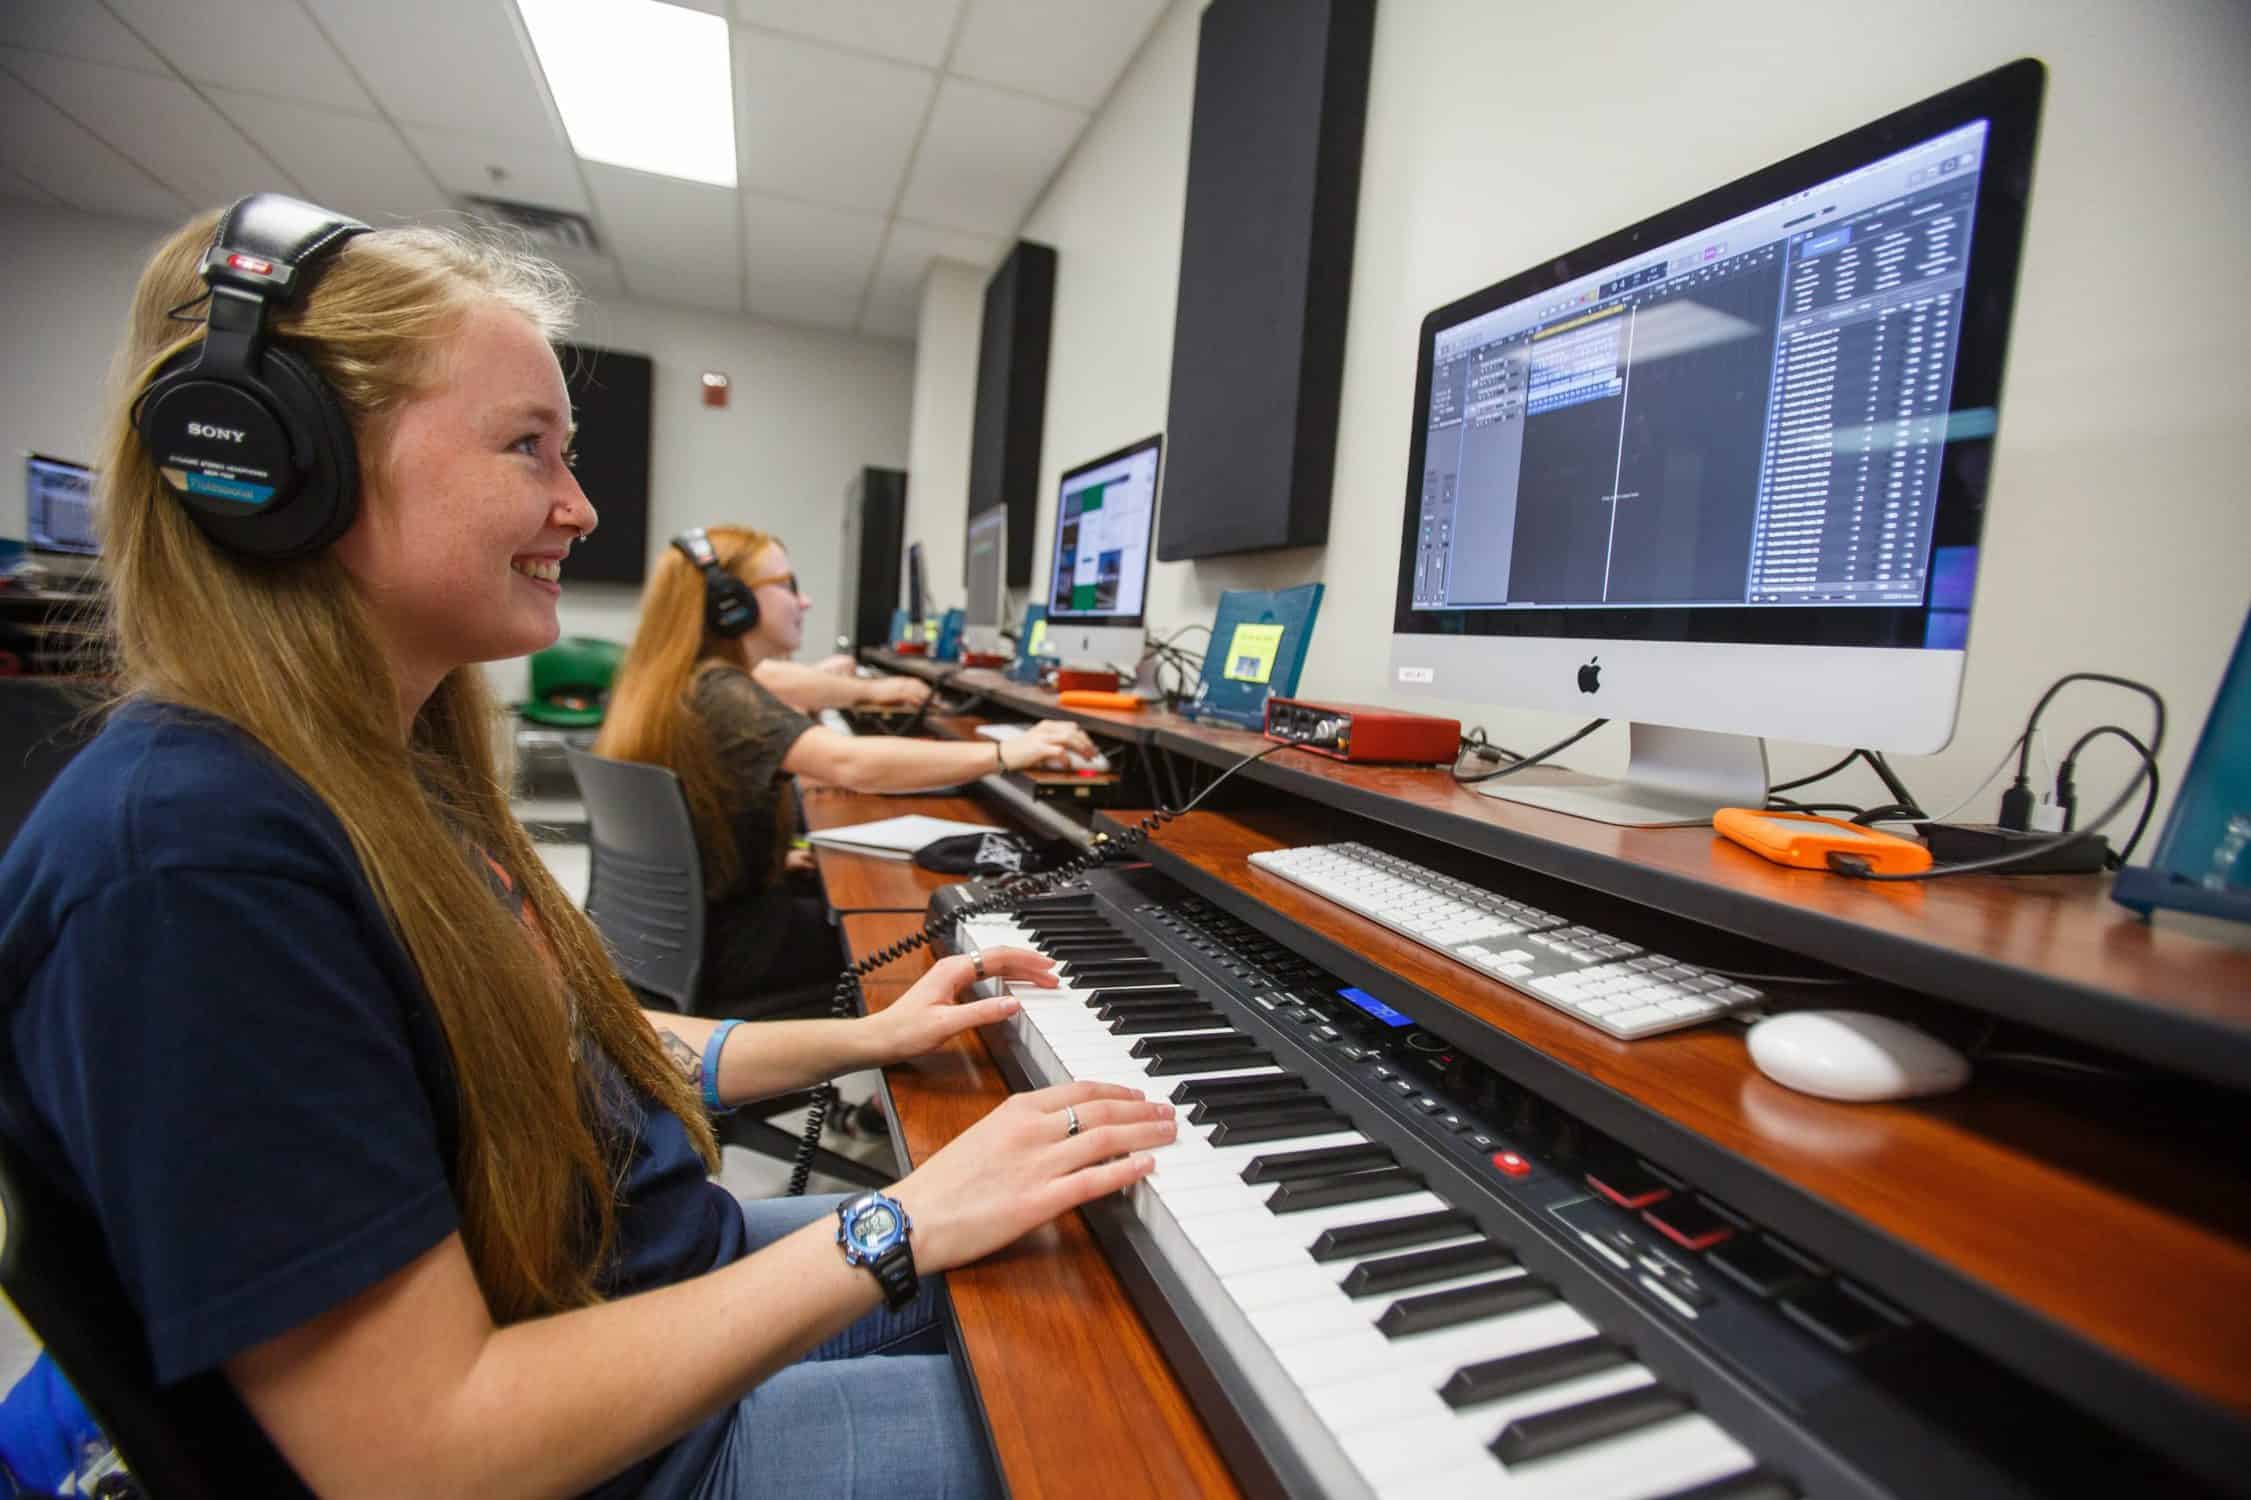 Student looks at computer while creating music with a keyboard